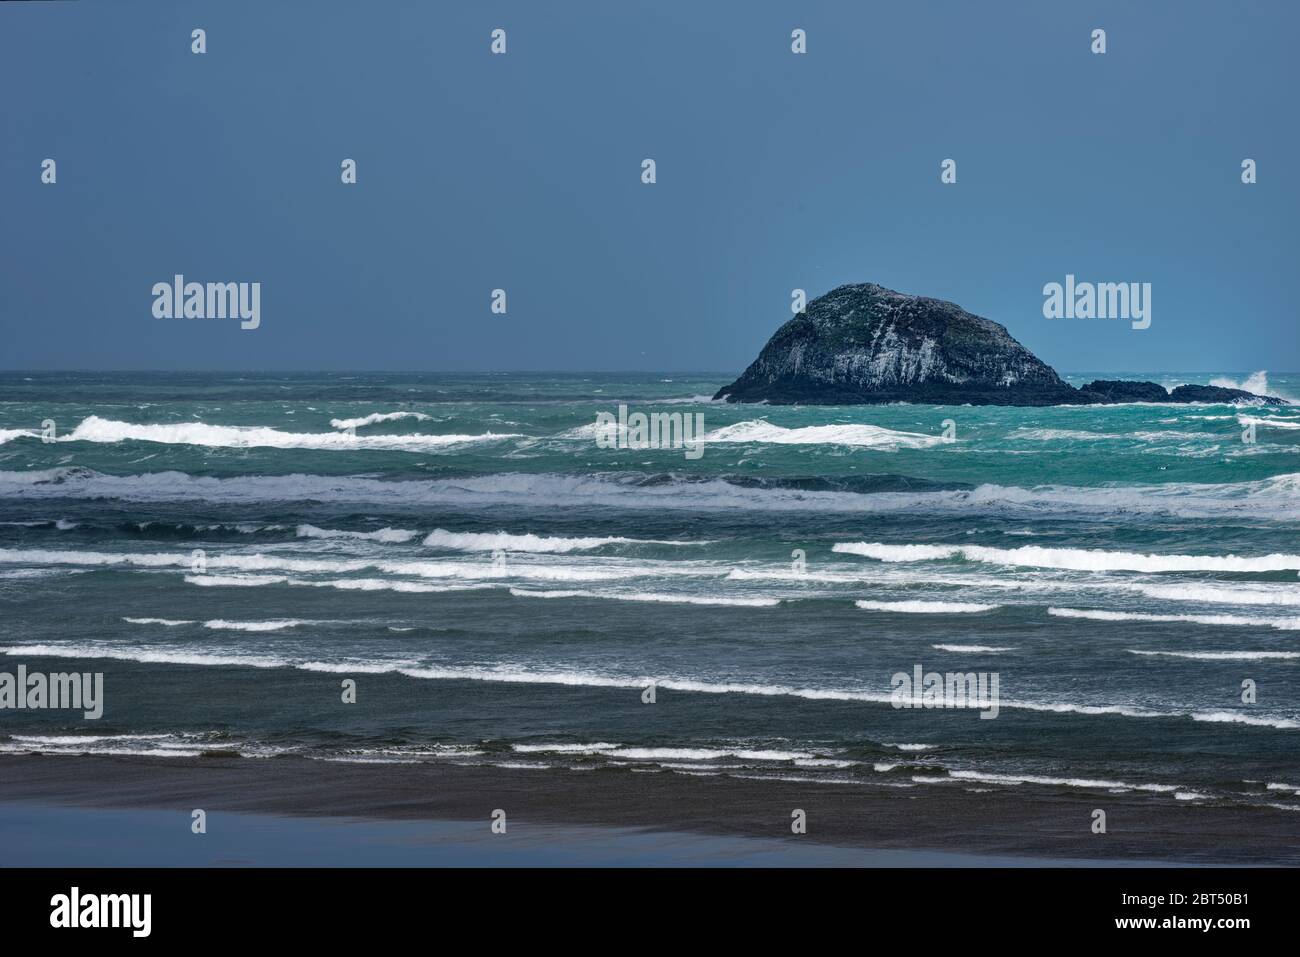 Surf on an empty beach on a windy day under clear skies and a rocky island in the background Stock Photo